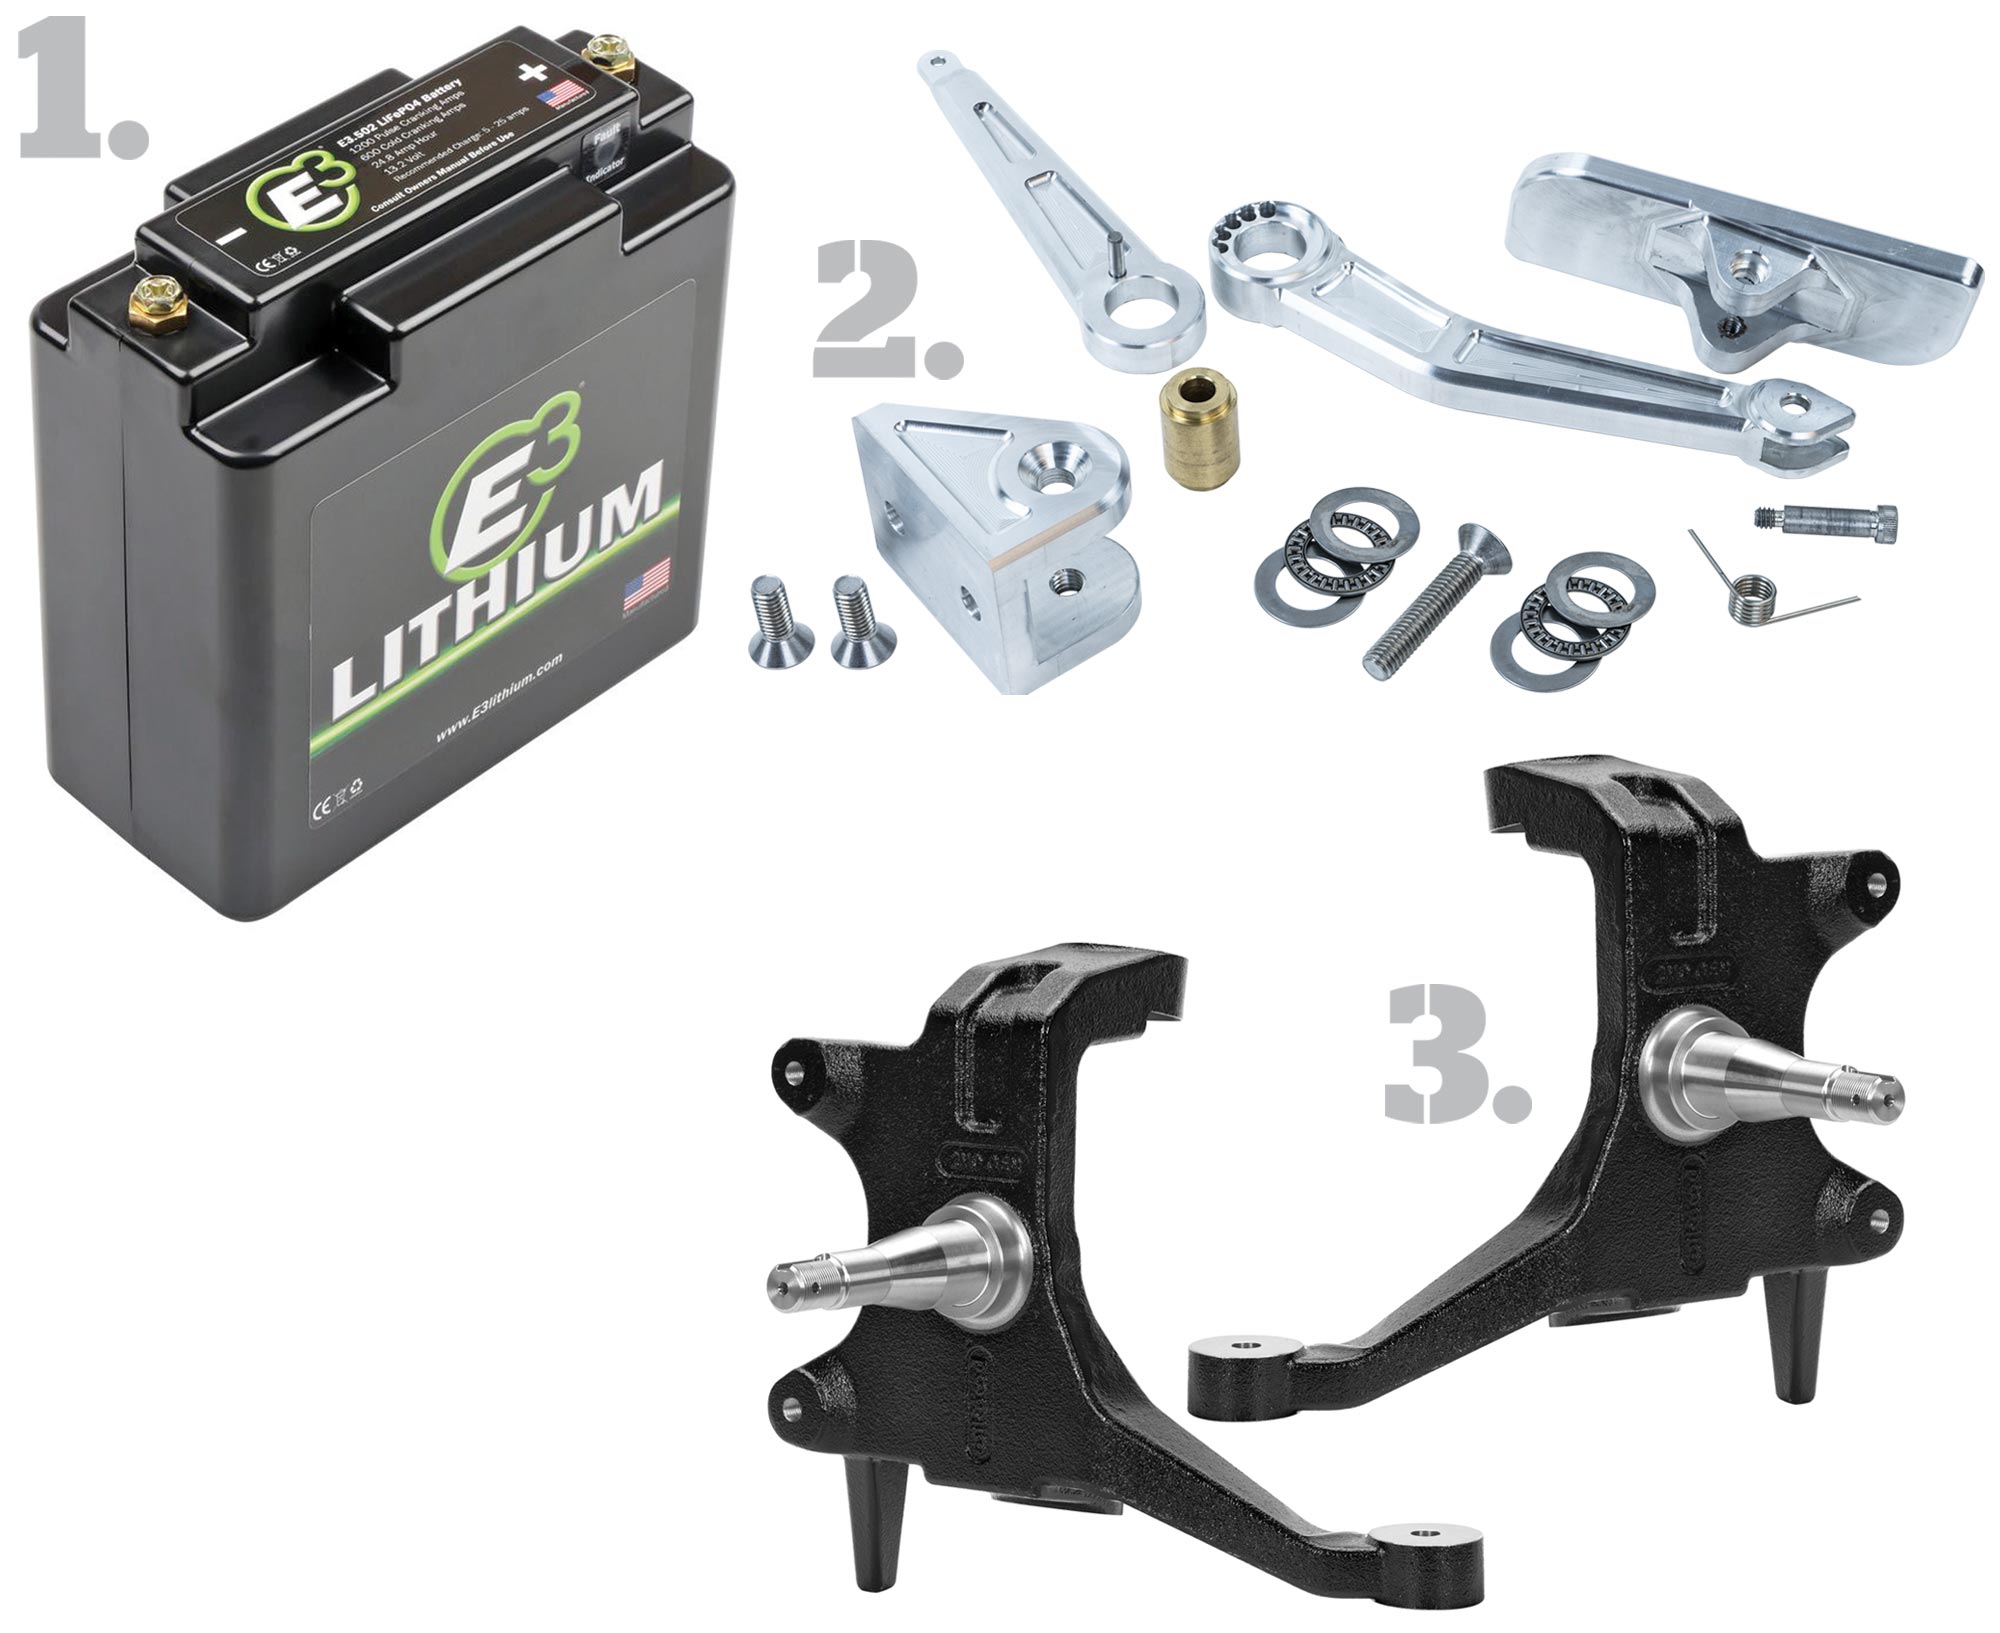 E3 Spark Plugs ultra-lightweight lithium iron phosphate starter battery; Scott’s Hotrods ’N Customs’ CNC-machined billet aluminum universal Hot Rod Gas Pedal parts; 2 Wilwood 2-inch drop ProSpindles